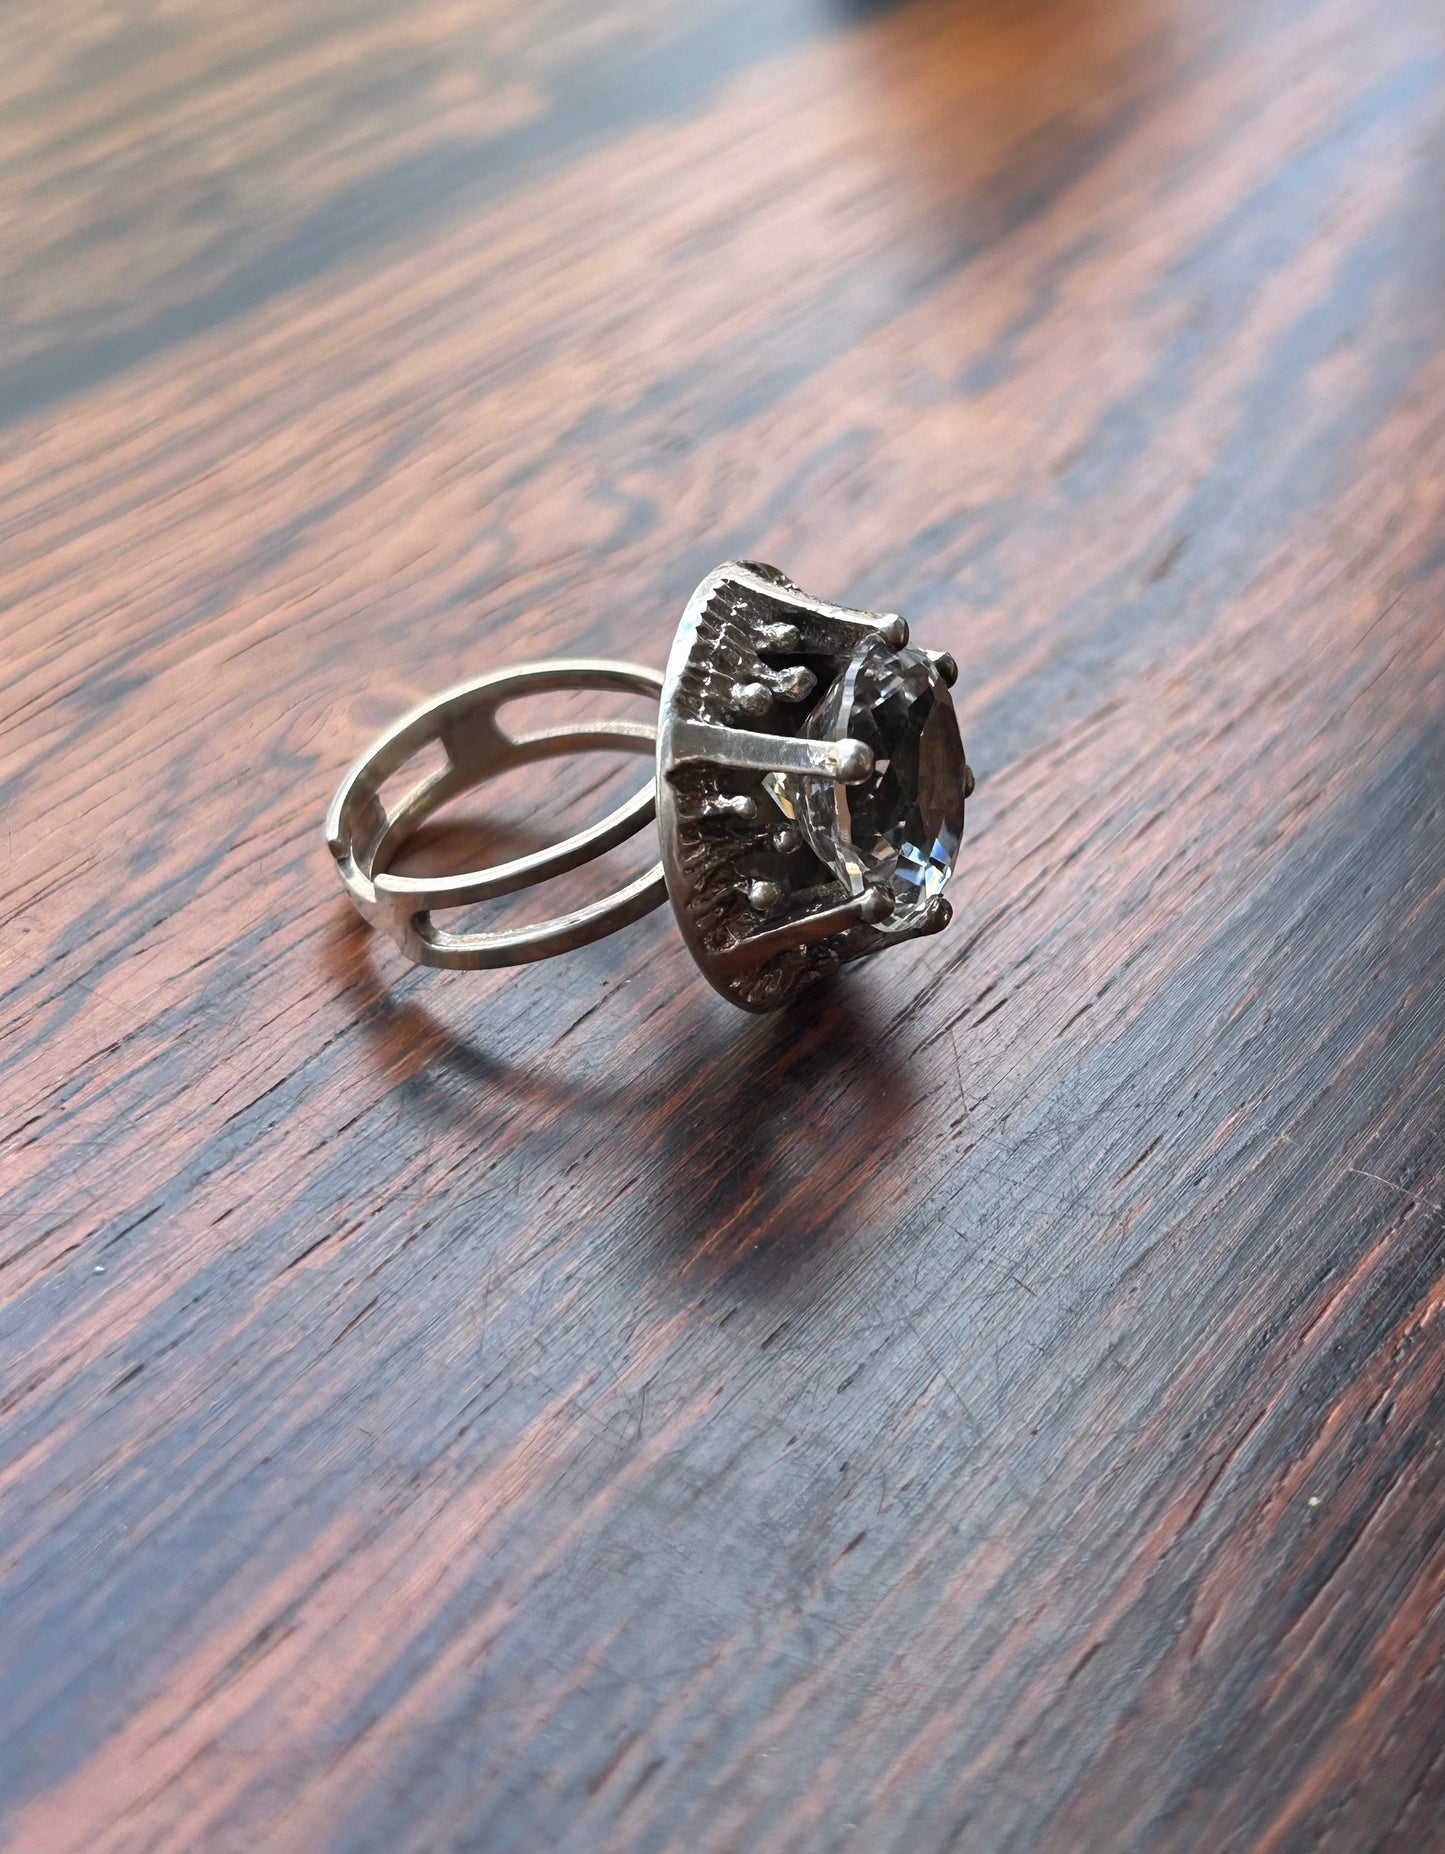 Silver ring with a large cut rock crystal